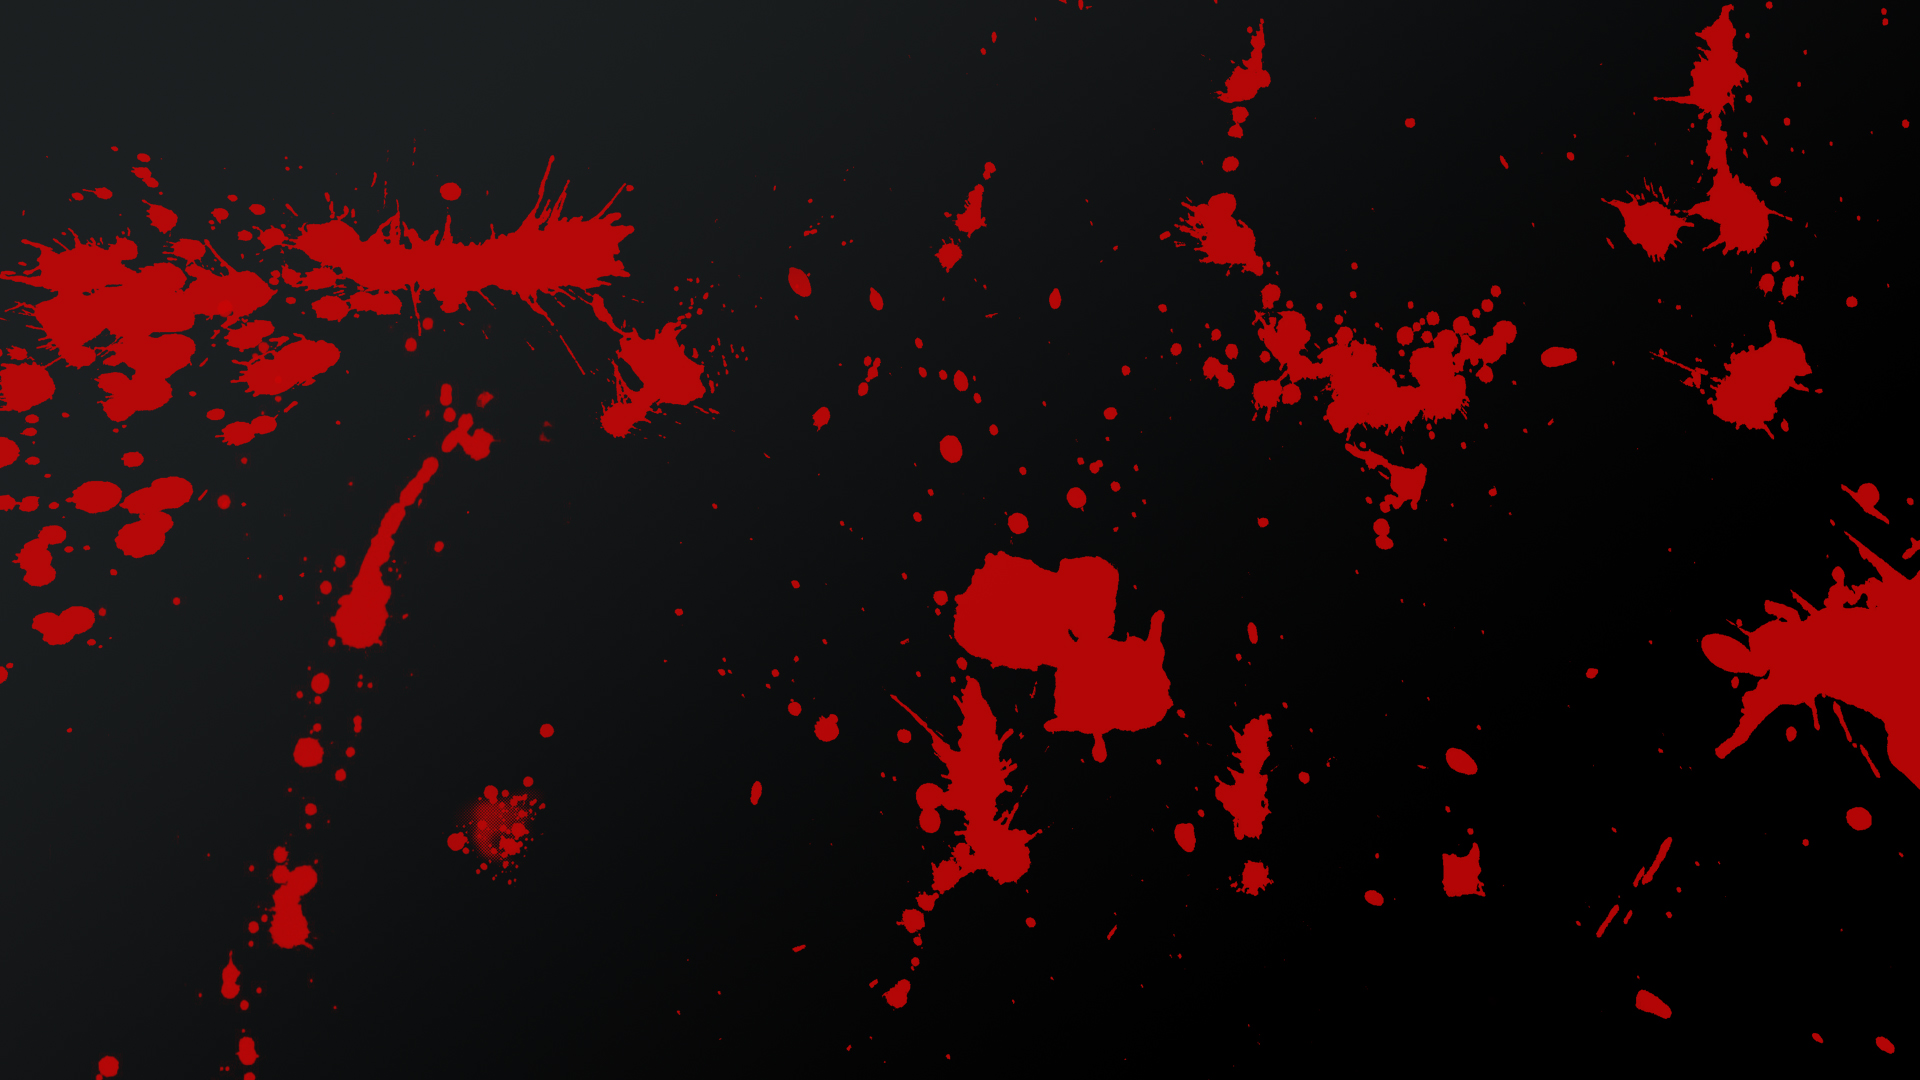 Real Blood Splatter Background Image Amp Pictures Becuo